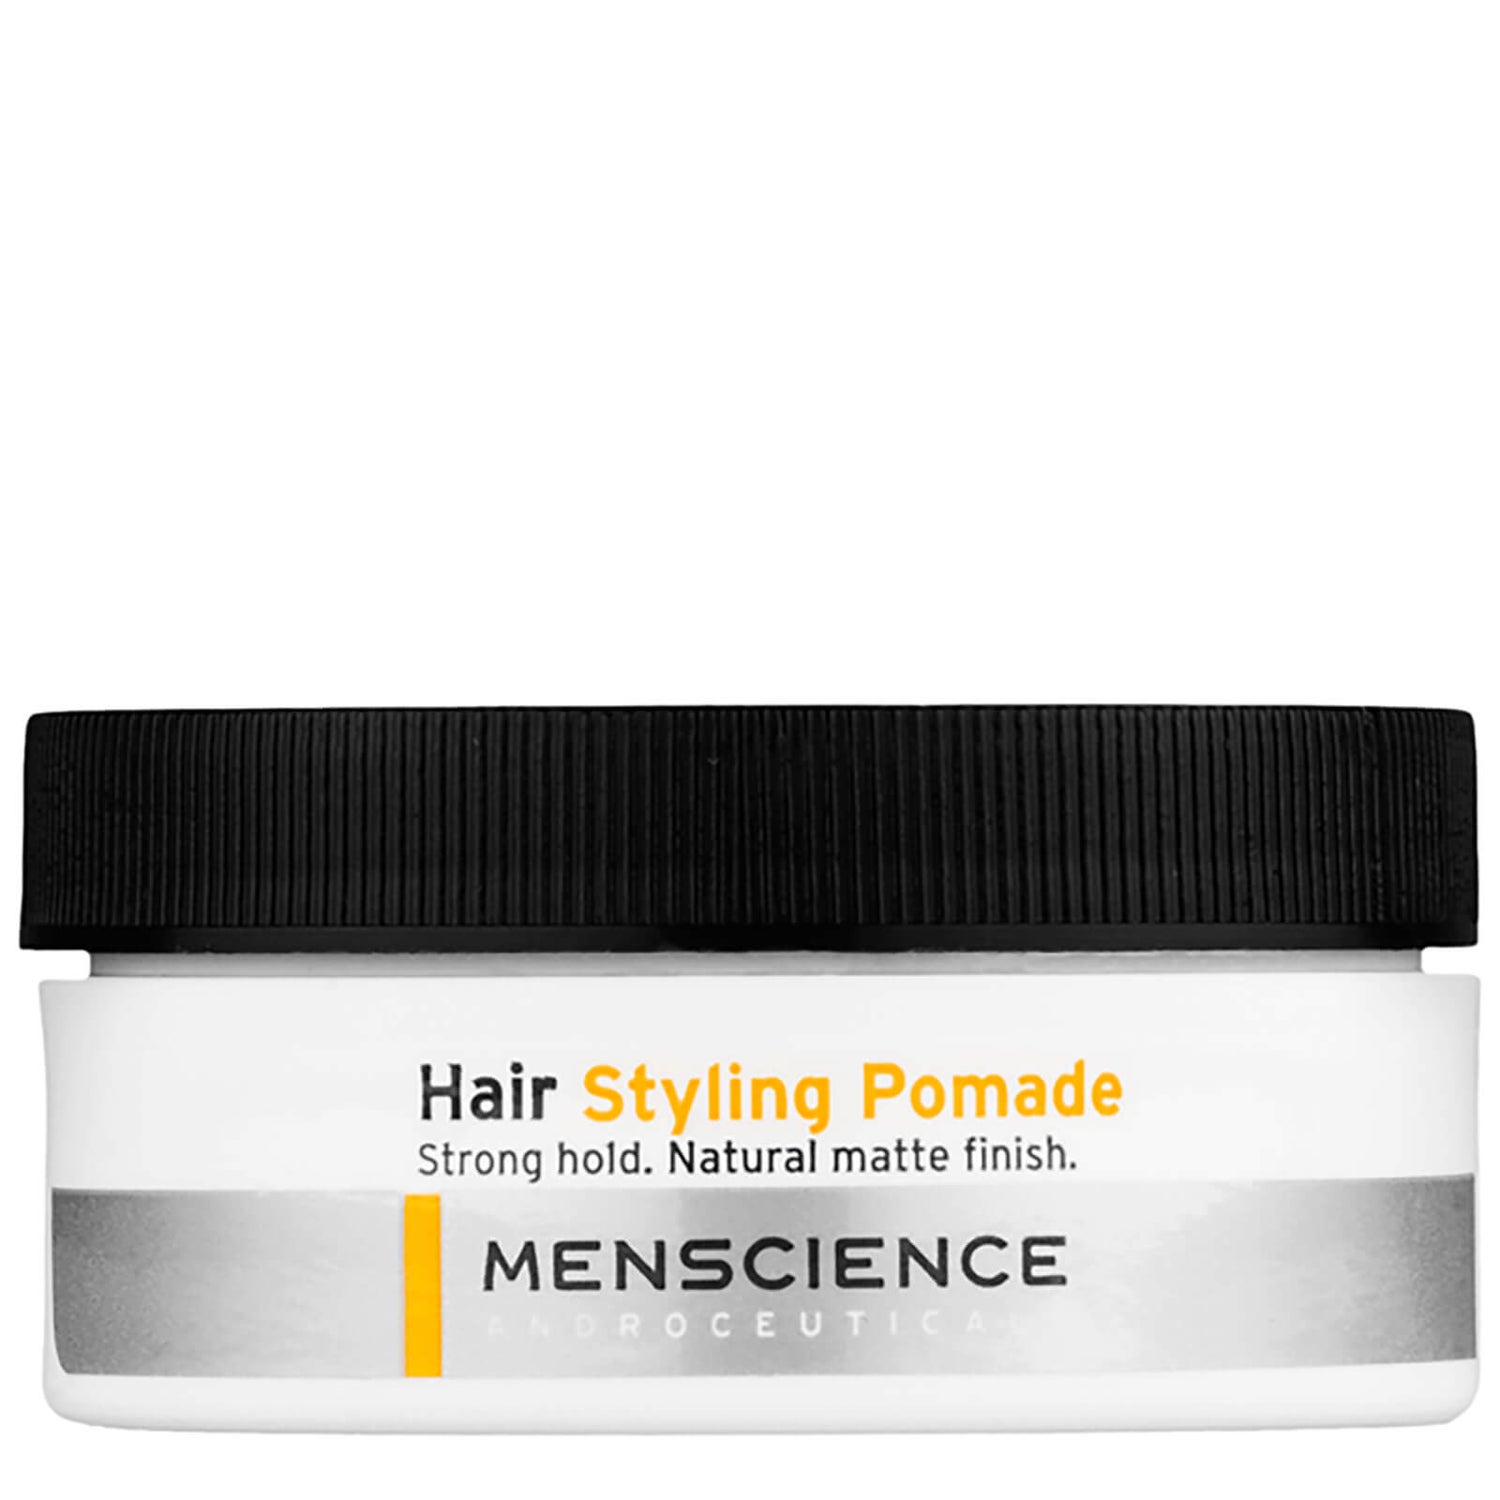 Menscience Hair Styling Pomade (56 g)